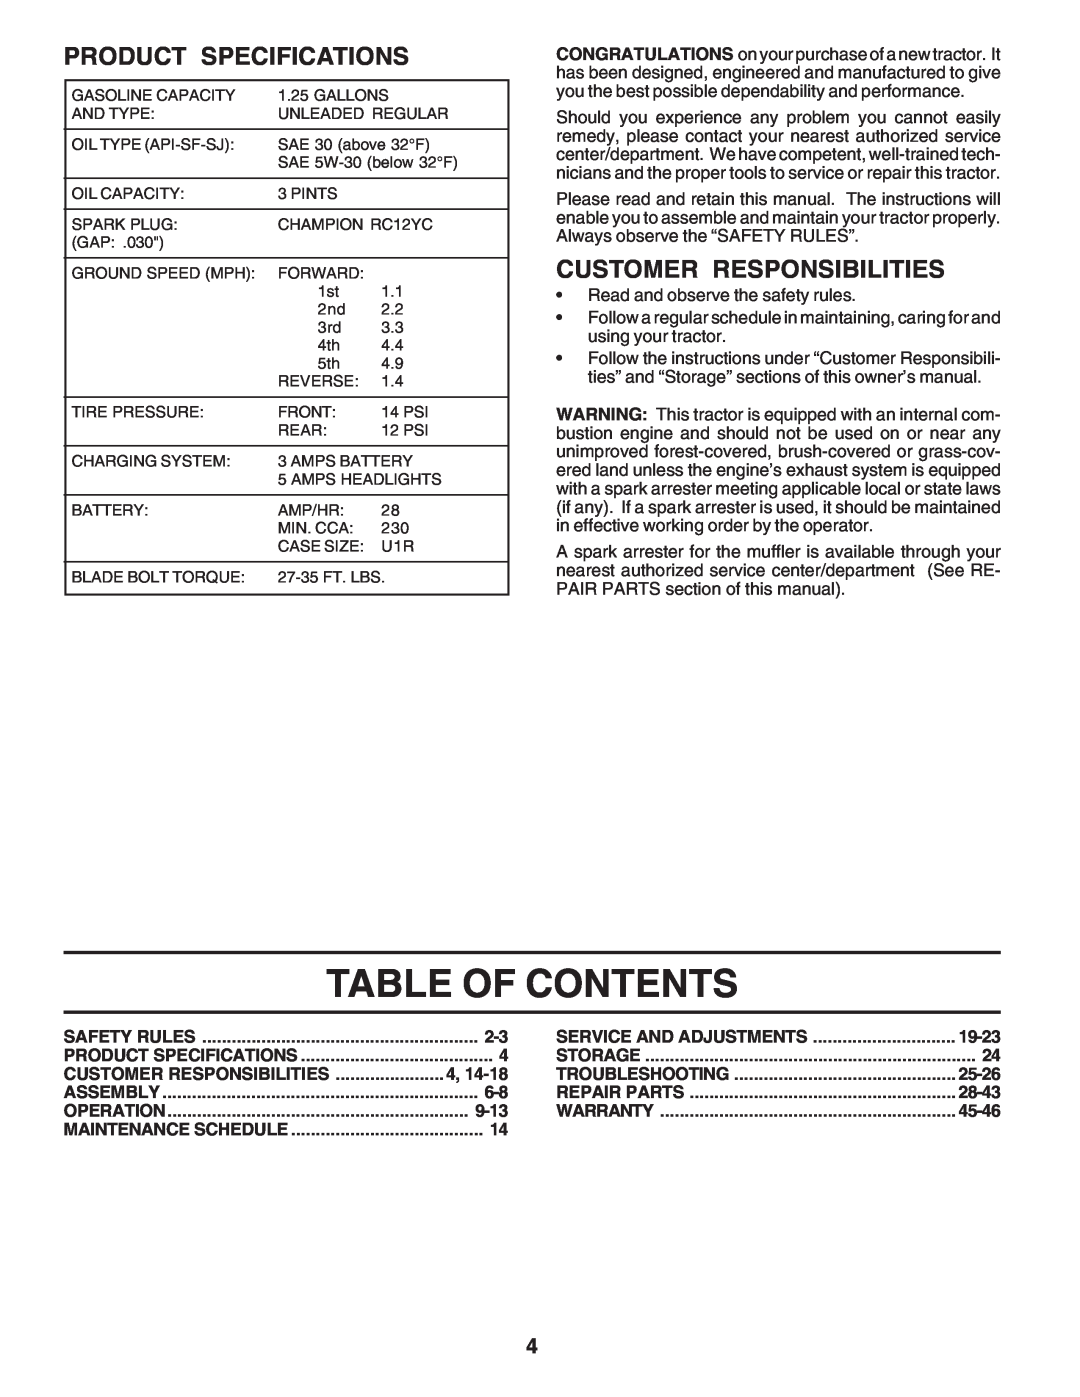 Poulan PC1538B Table Of Contents, Product Specifications, Customer Responsibilities, 19-23, 25-26, 28-43, 9-13, 45-46 